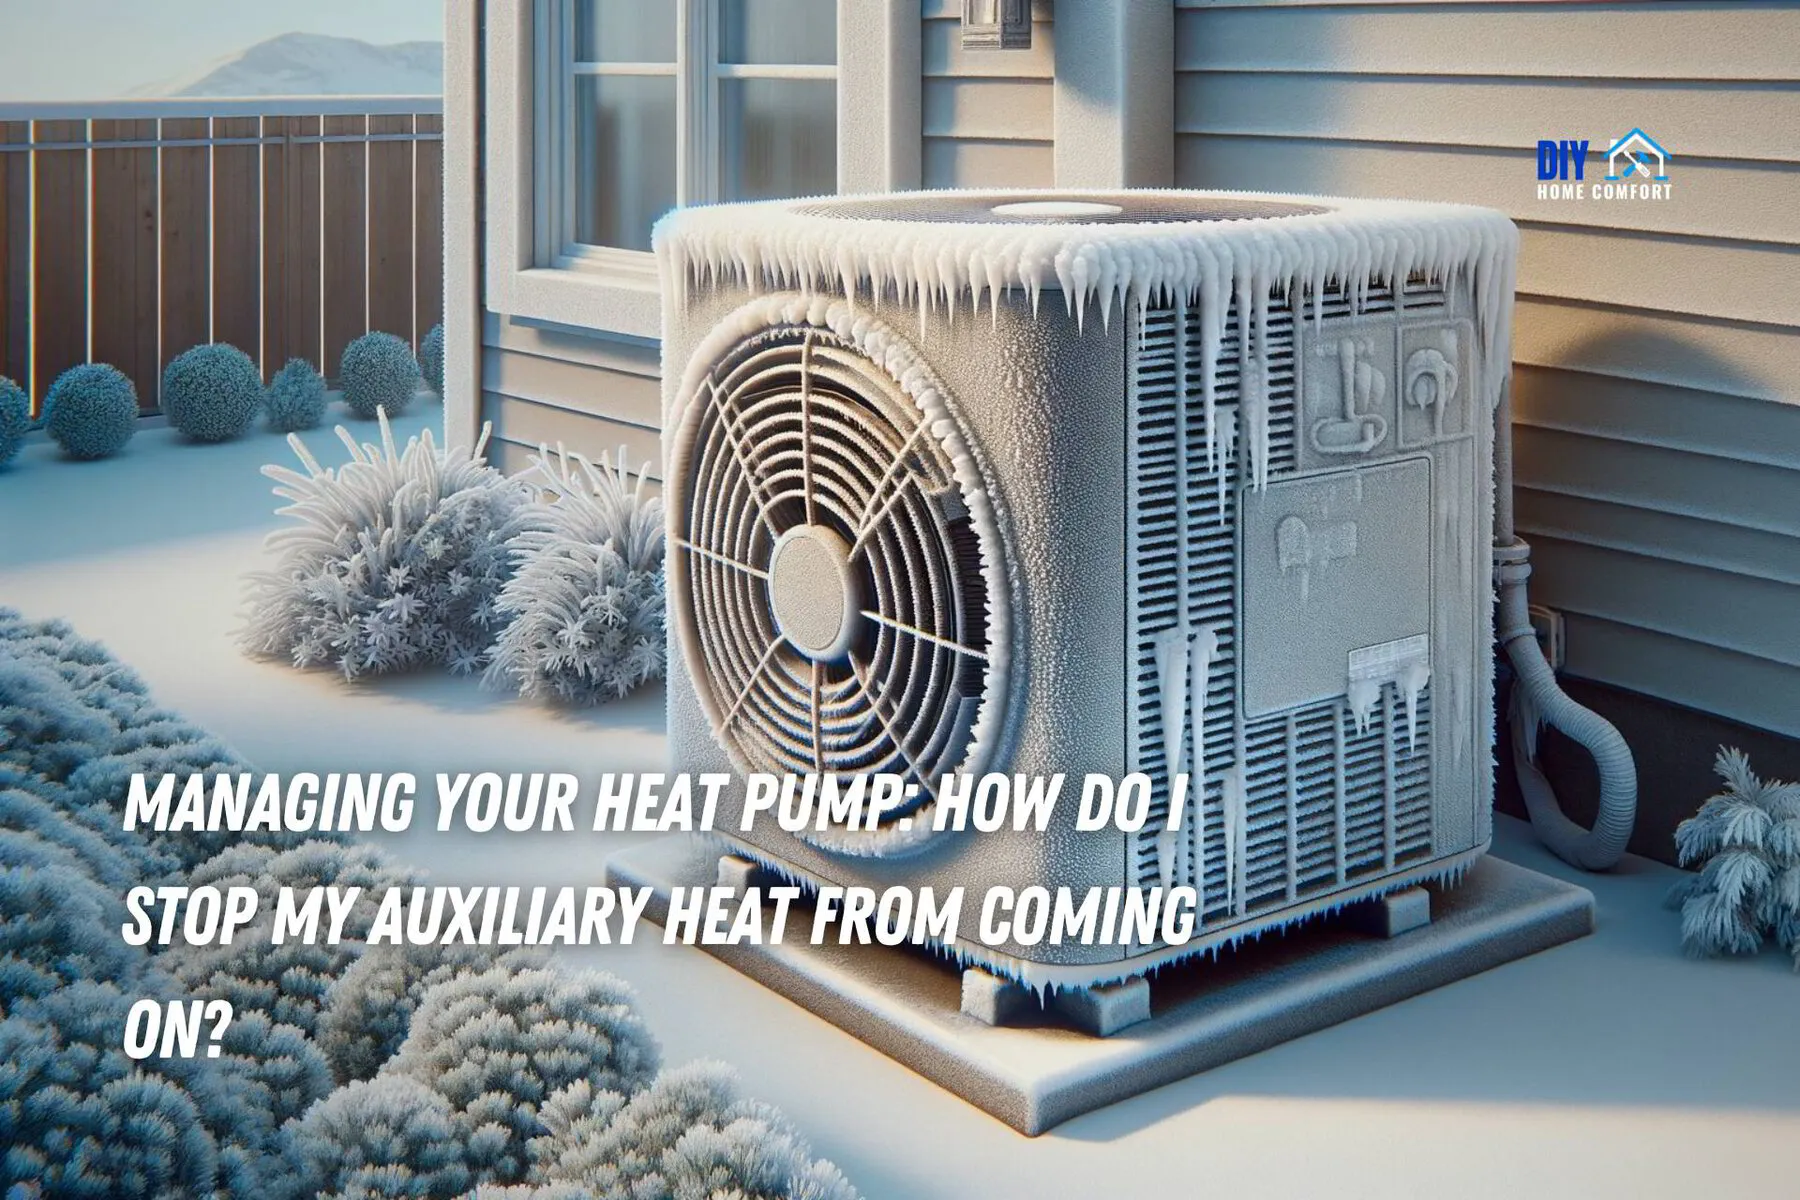 Managing Your Heat Pump: How Do I Stop My Auxiliary Heat from Coming On? | DIY Home Comfort